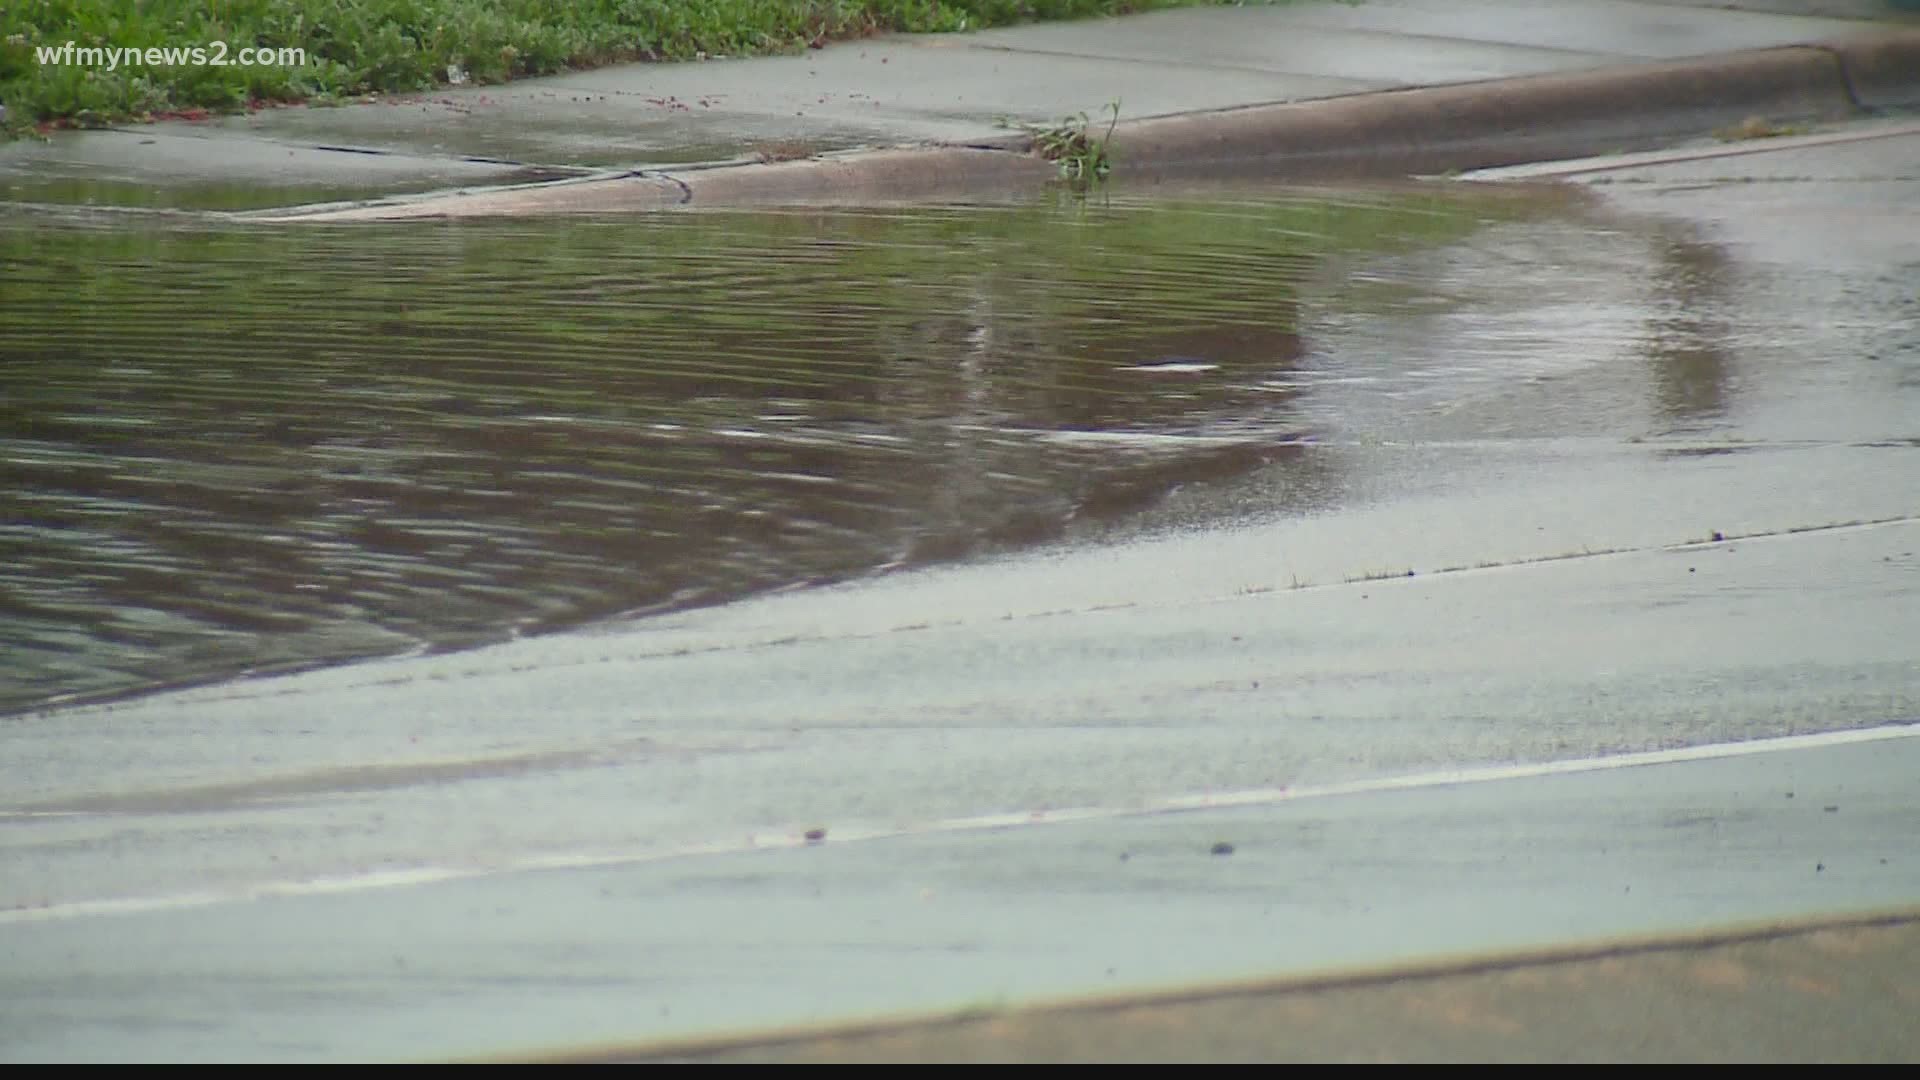 Residents say they’re used to Latham Park flooding when the forecast calls for rain.